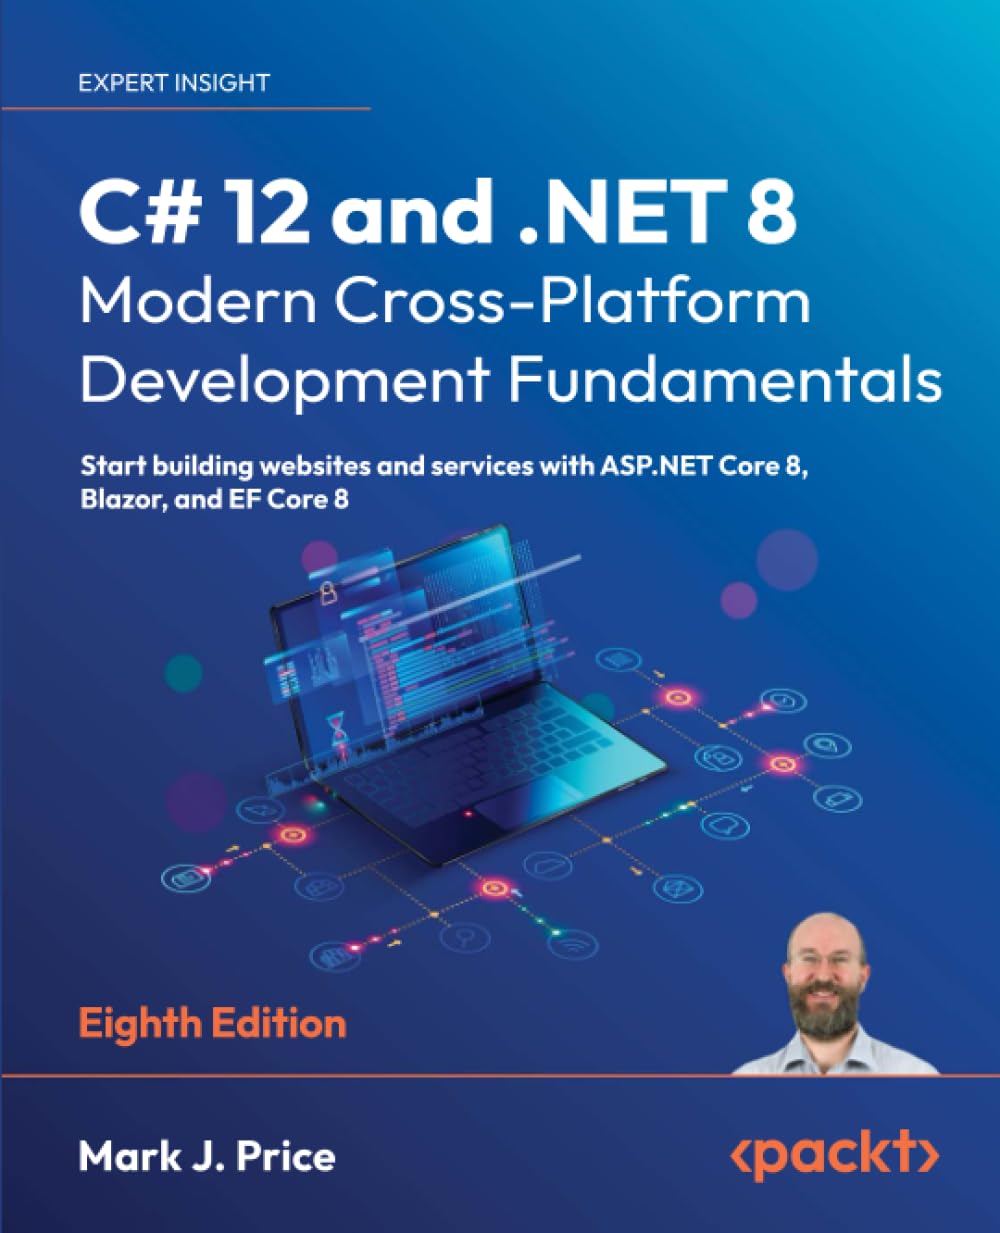 C# 12 and .NET 8 – Modern Cross-Platform Development Fundamentals: Start building websites and services with ASP.NET Core 8, Blazor, and EF Core 8